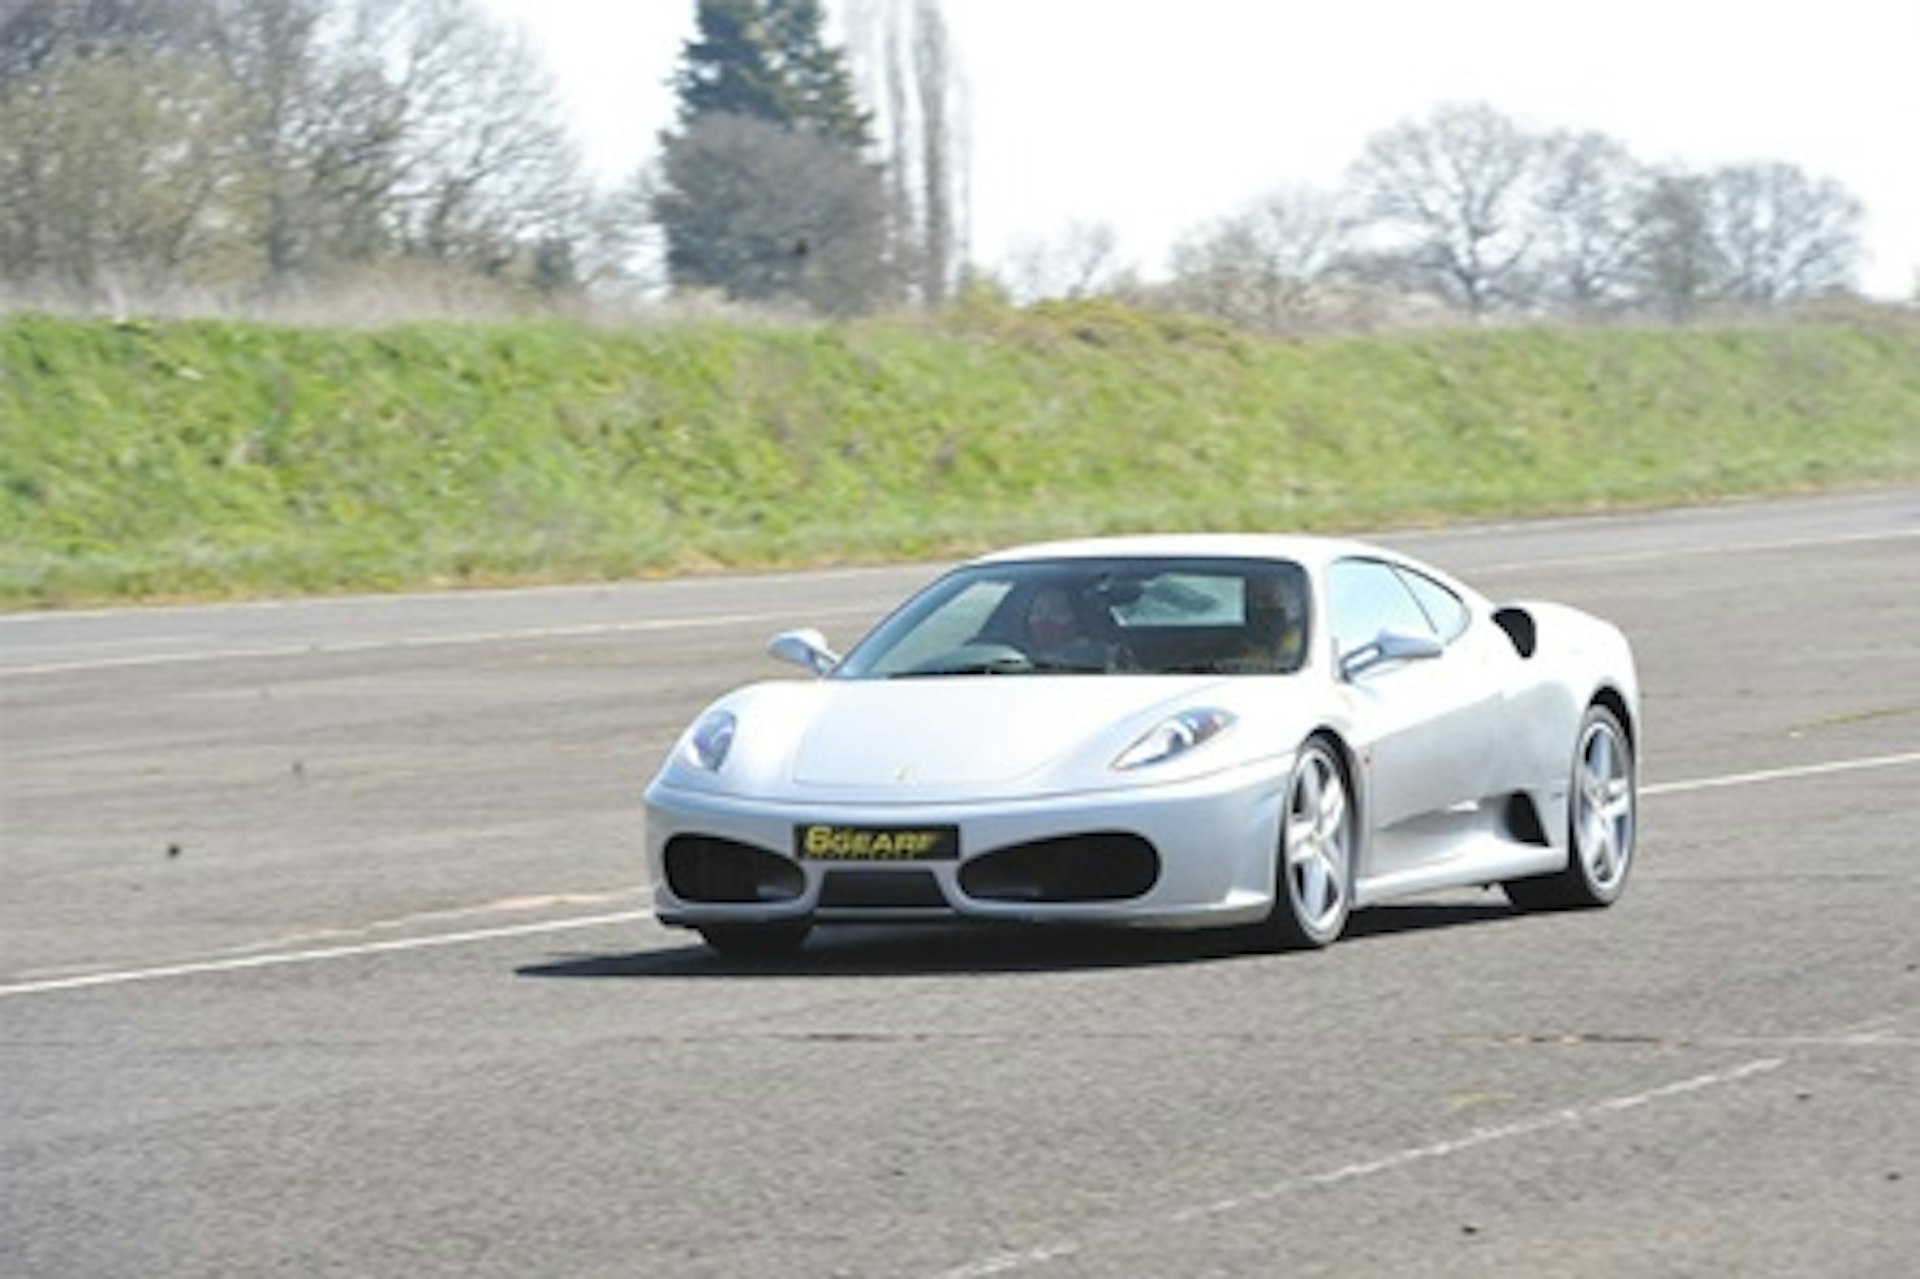 Double Supercar Blast with Demo Lap, Photo and Breakfast at Stafford Driving Centre 3